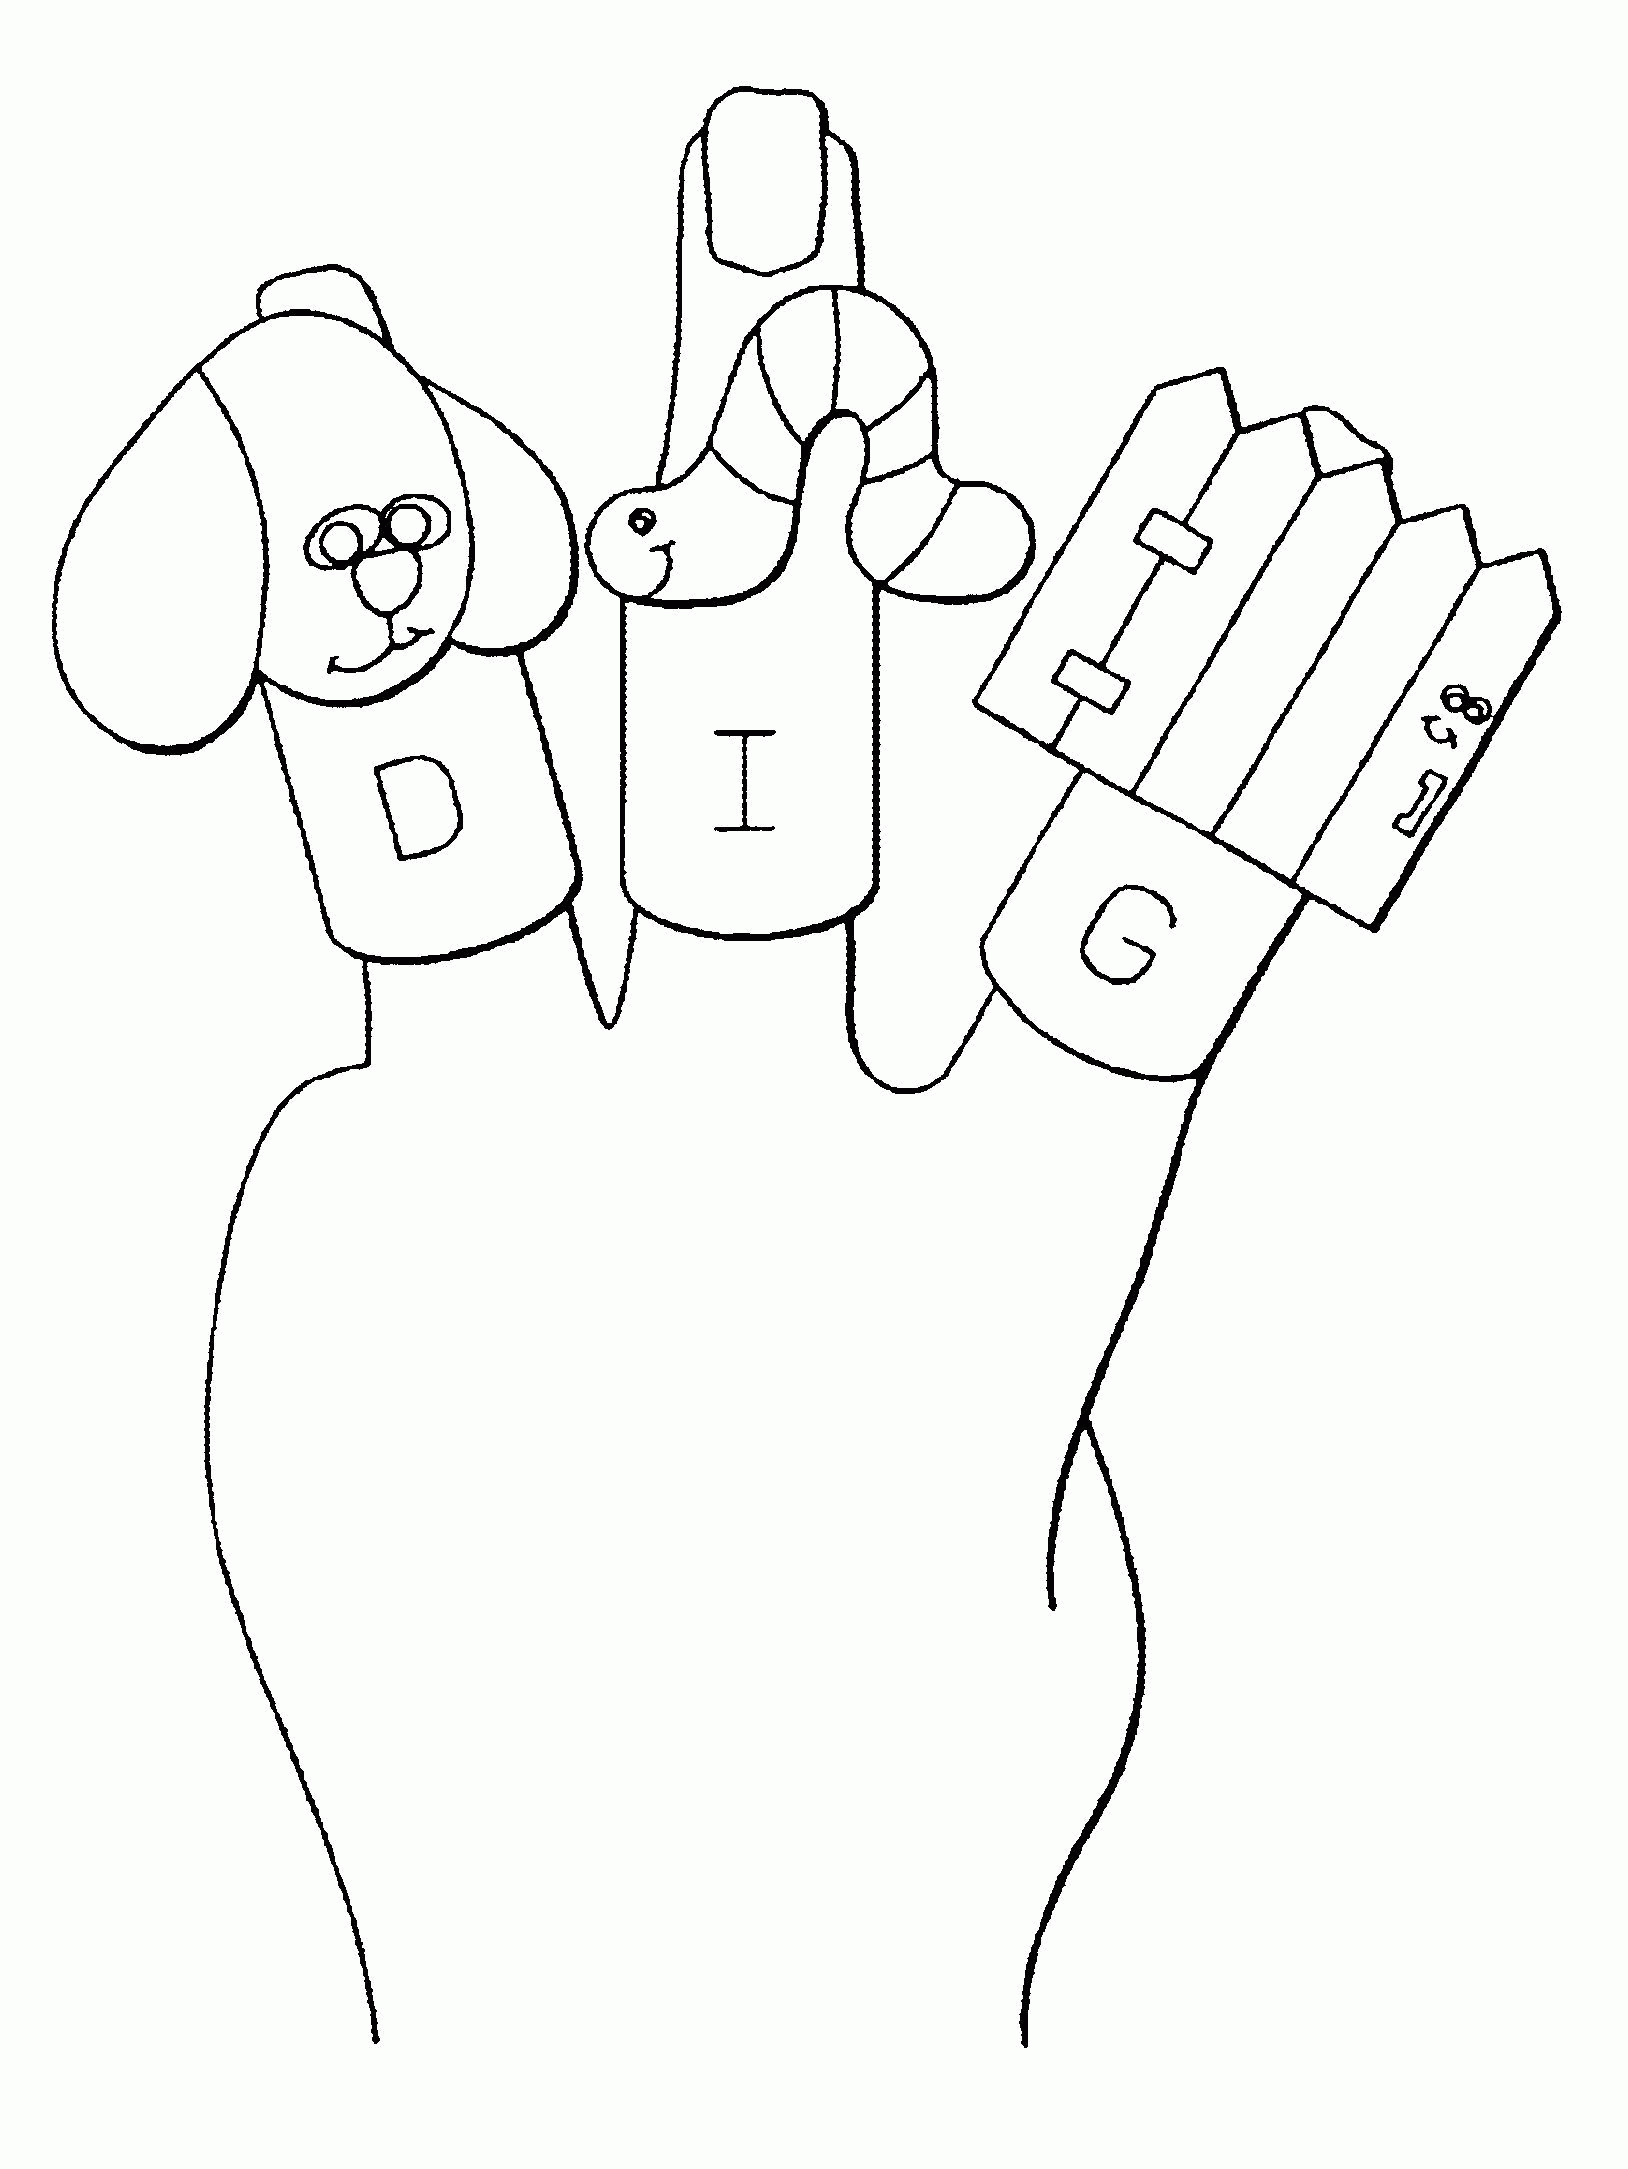 Bible Puppet Coloring Pages - Coloring Pages For All Ages